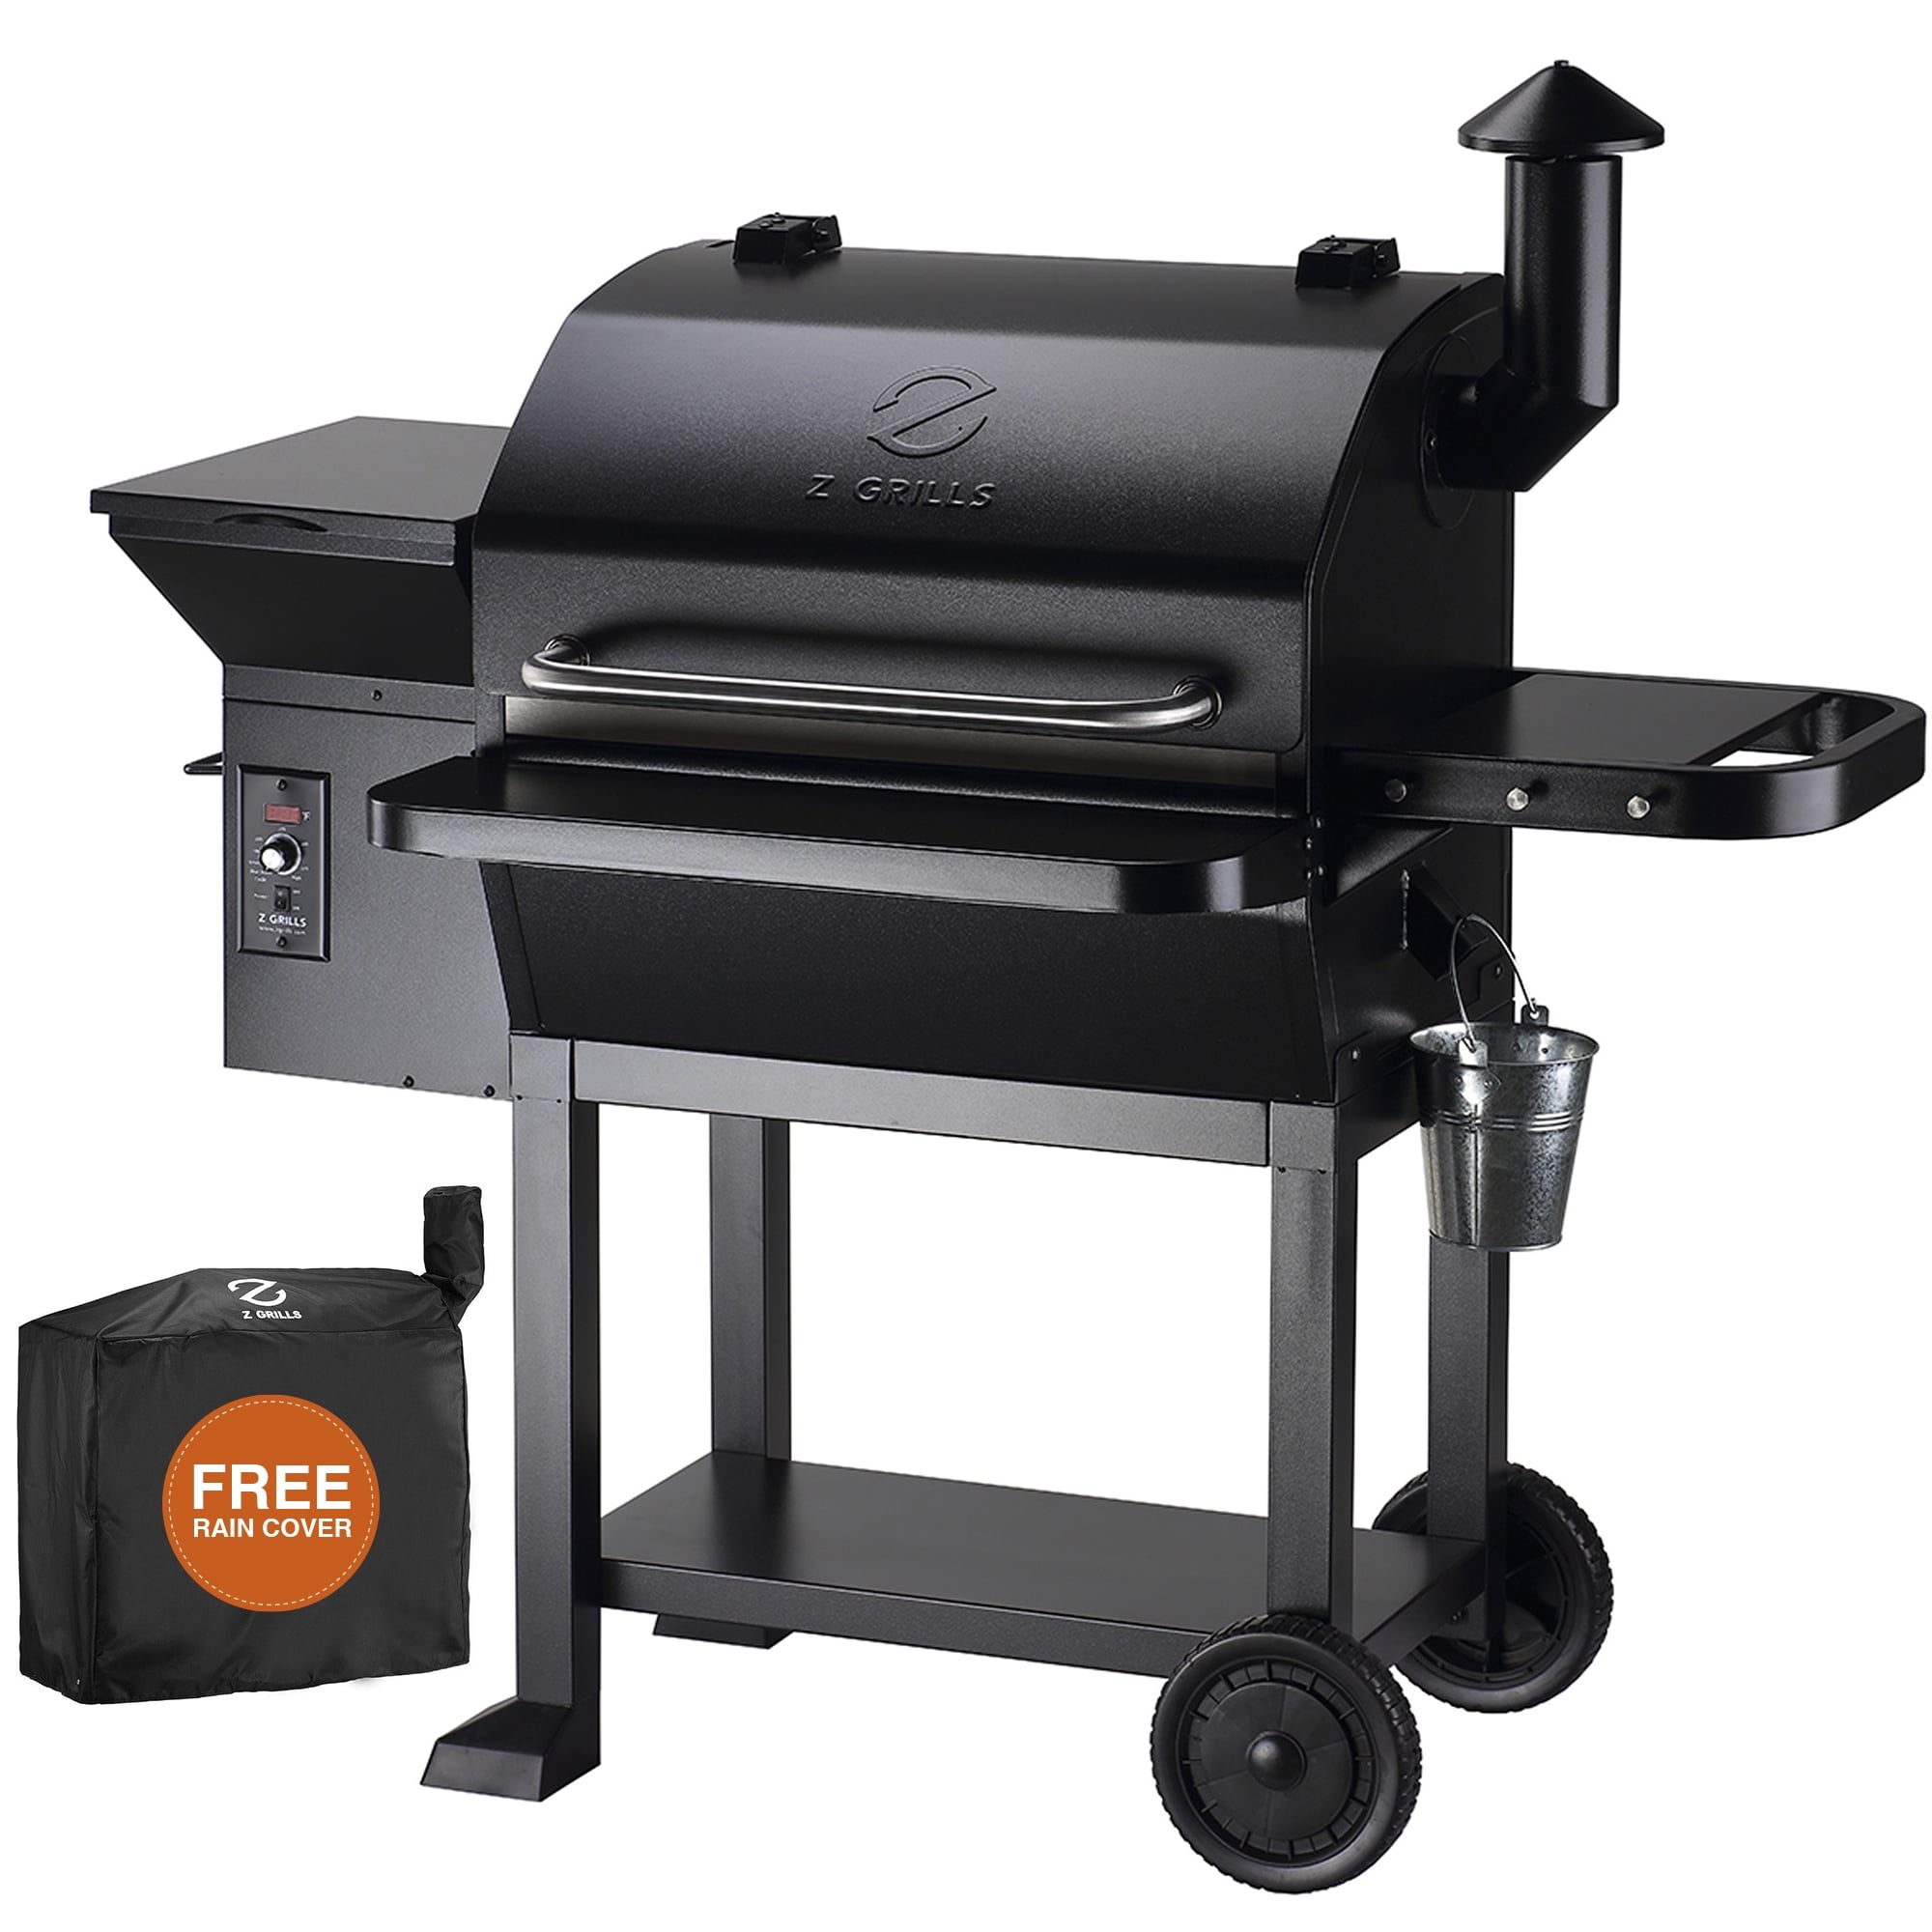 Z GRILLS ZPG-10002B 1060 sq. in. 8-in-1 Wood Pellet BBQ Grill and Smoke